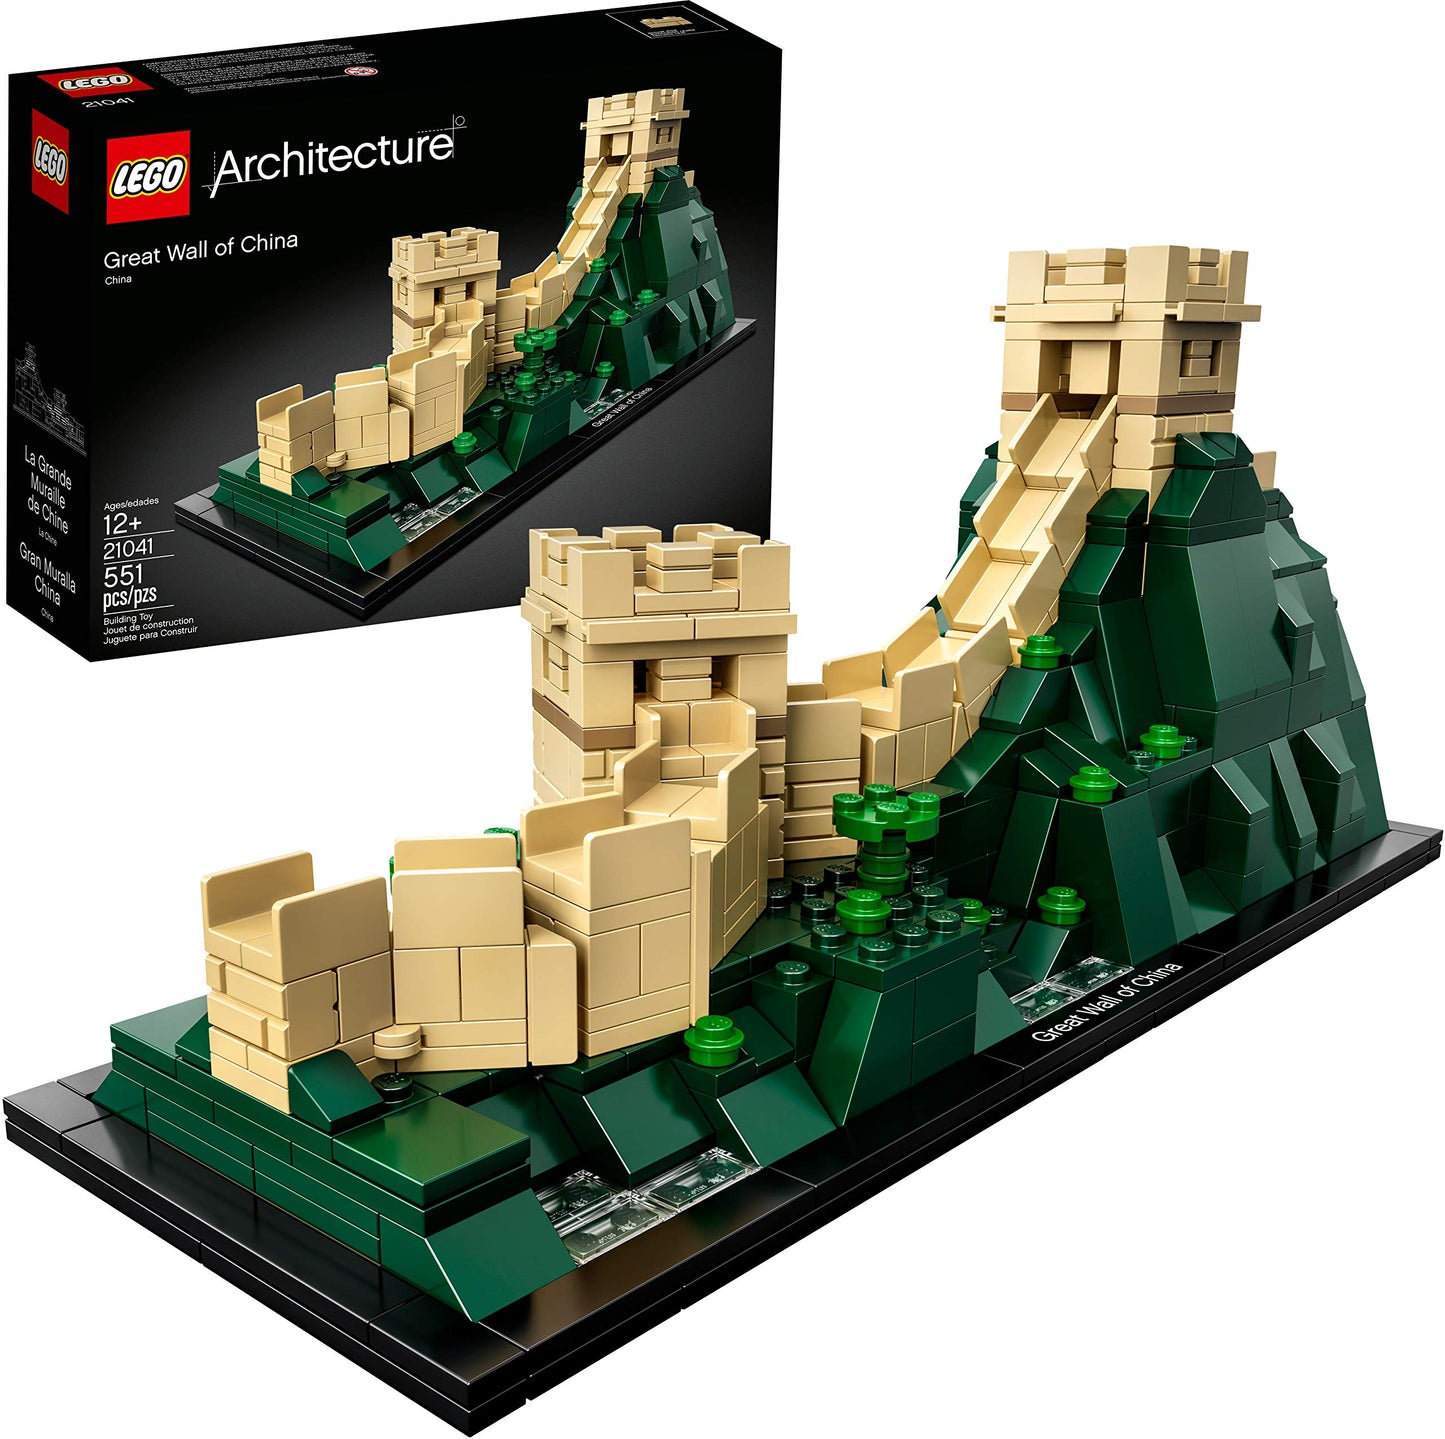 LEGO Architecture The Great Wall of China 21041